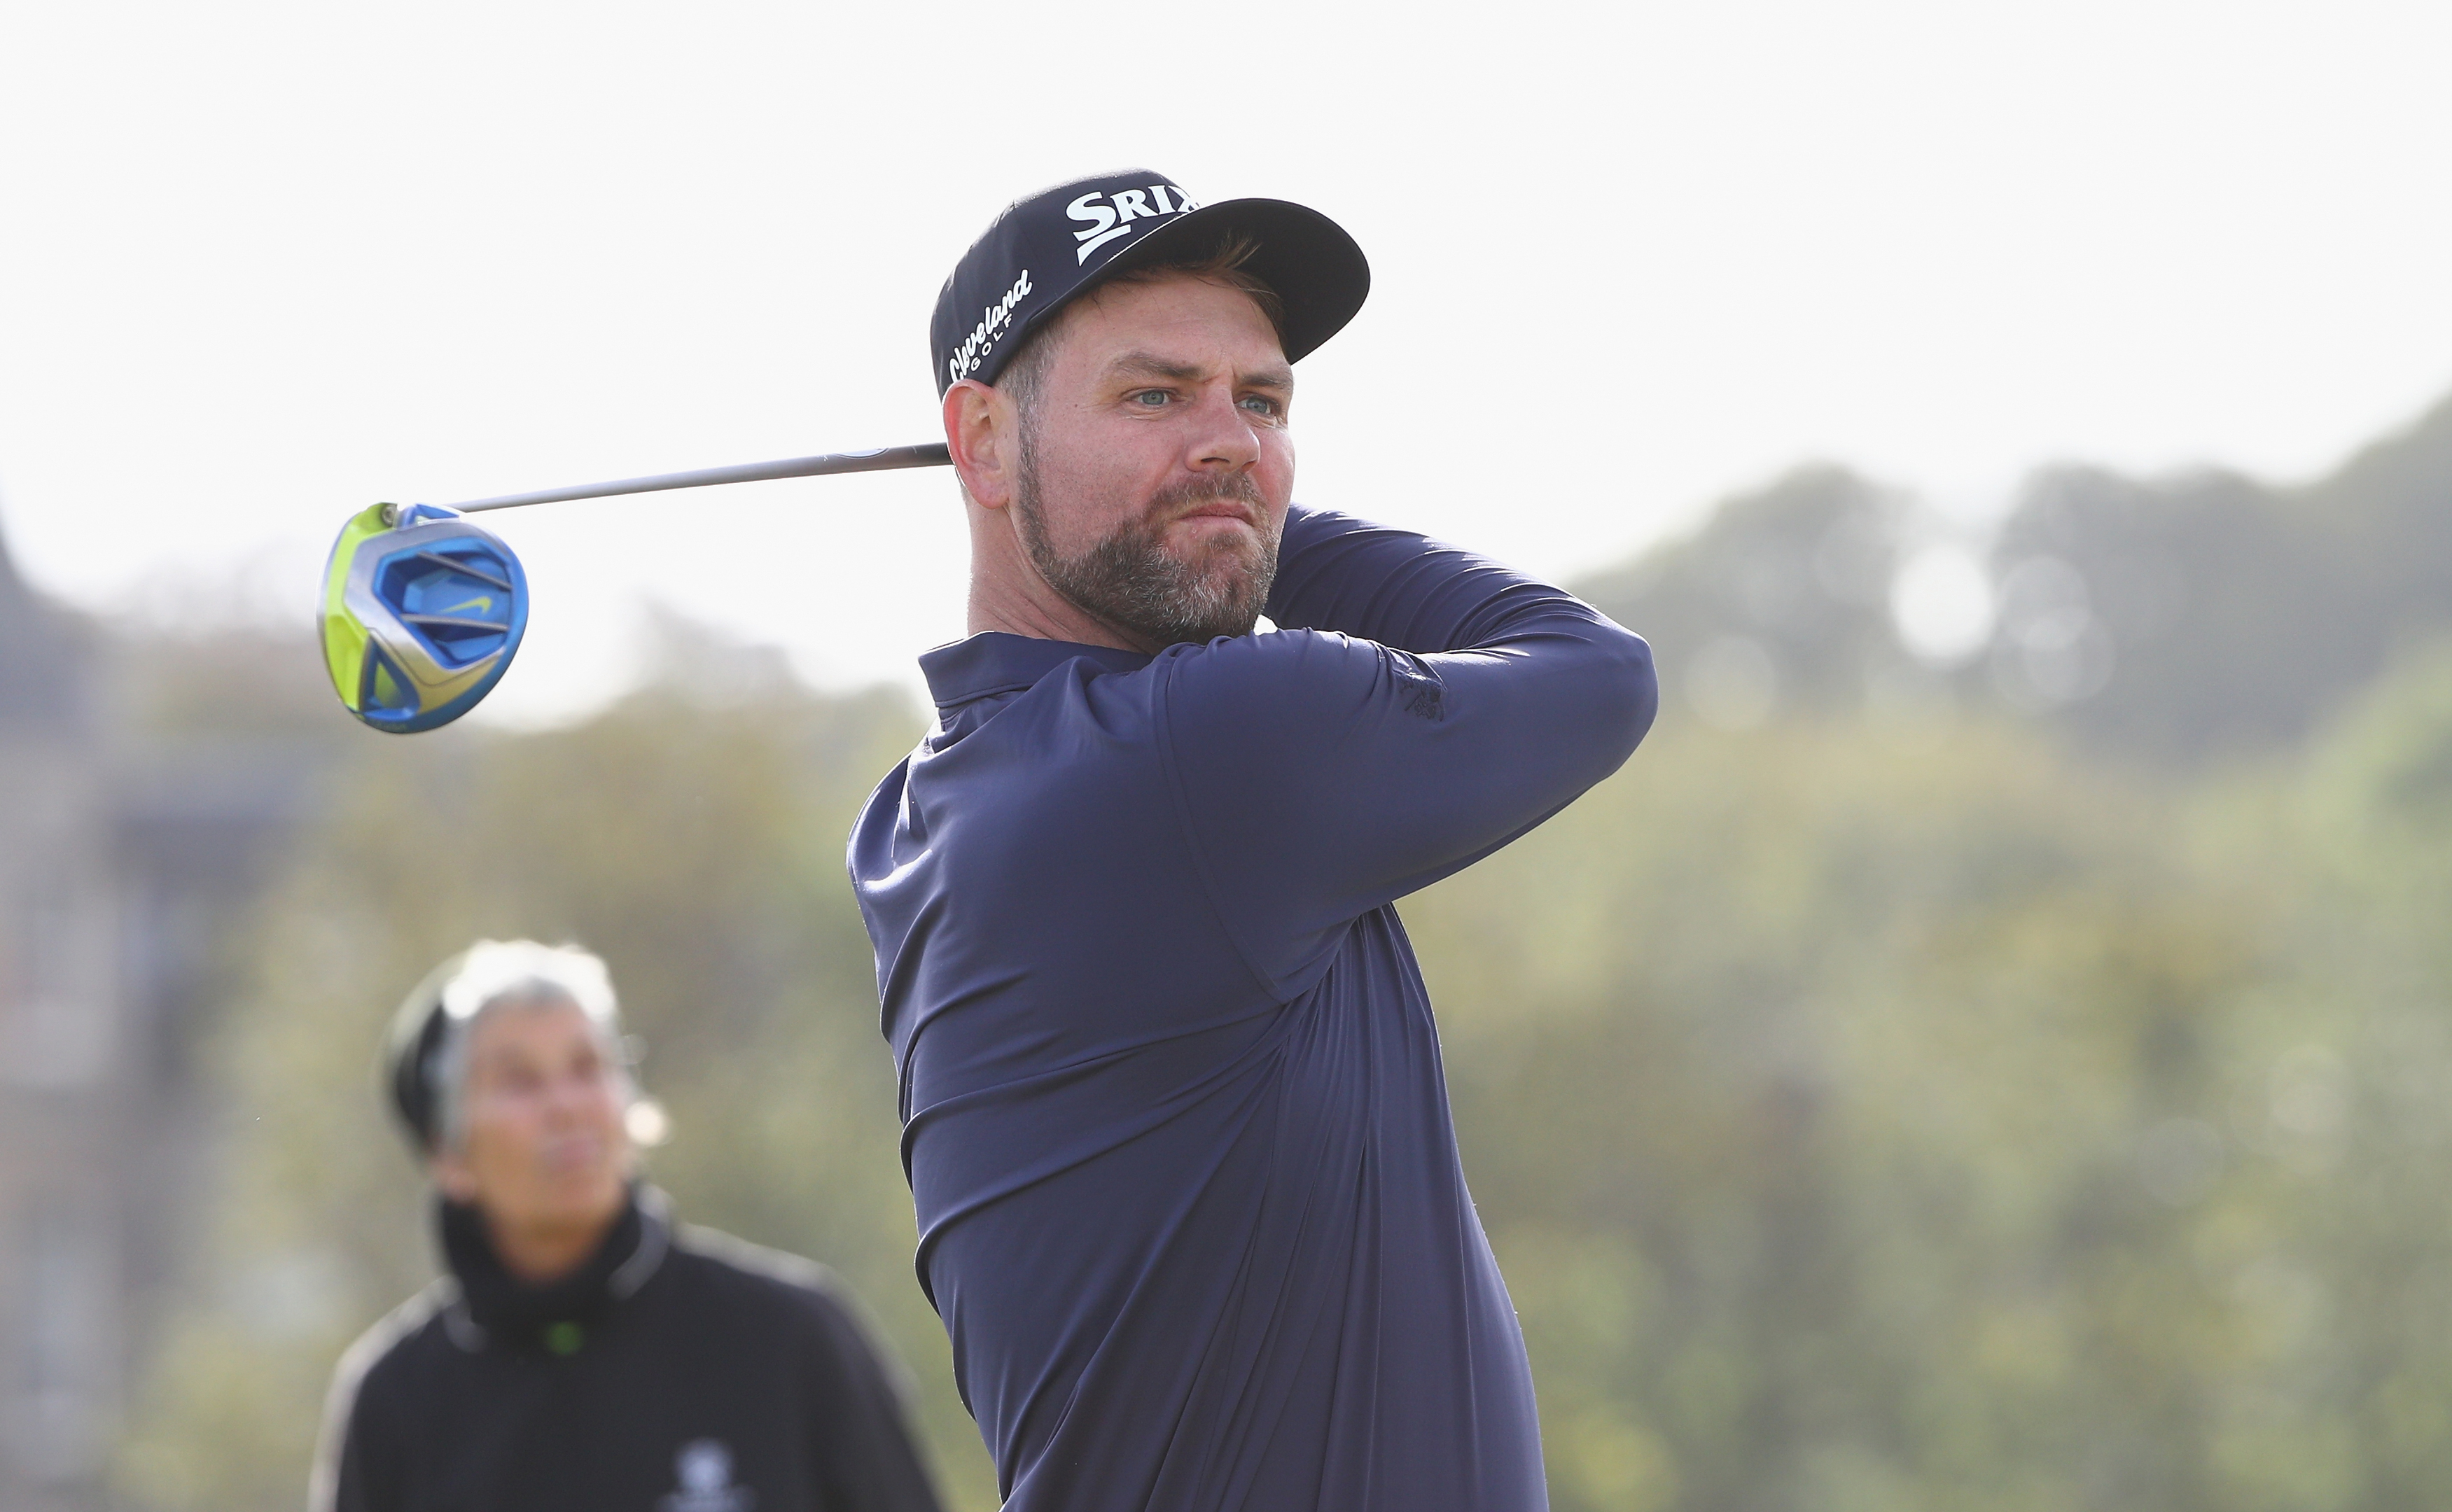 Brian McFadden during a practice round for the Alfred Dunhill Links Championship at Old Course in St Andrews last year